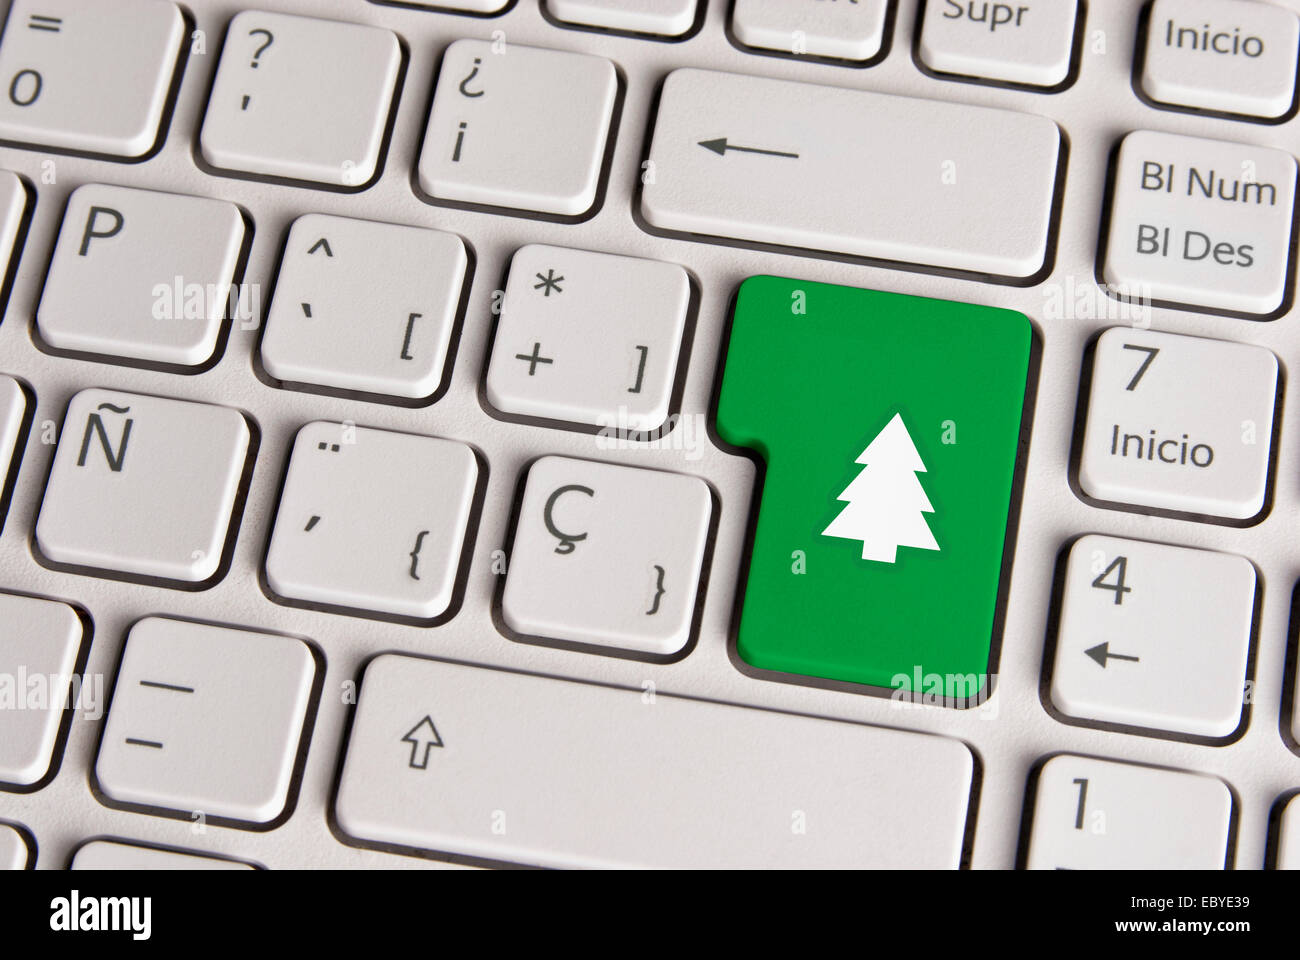 Spanish keyboard with Merry Christmas tree icon over green background button. Image with clipping path for easy change the key c Stock Photo